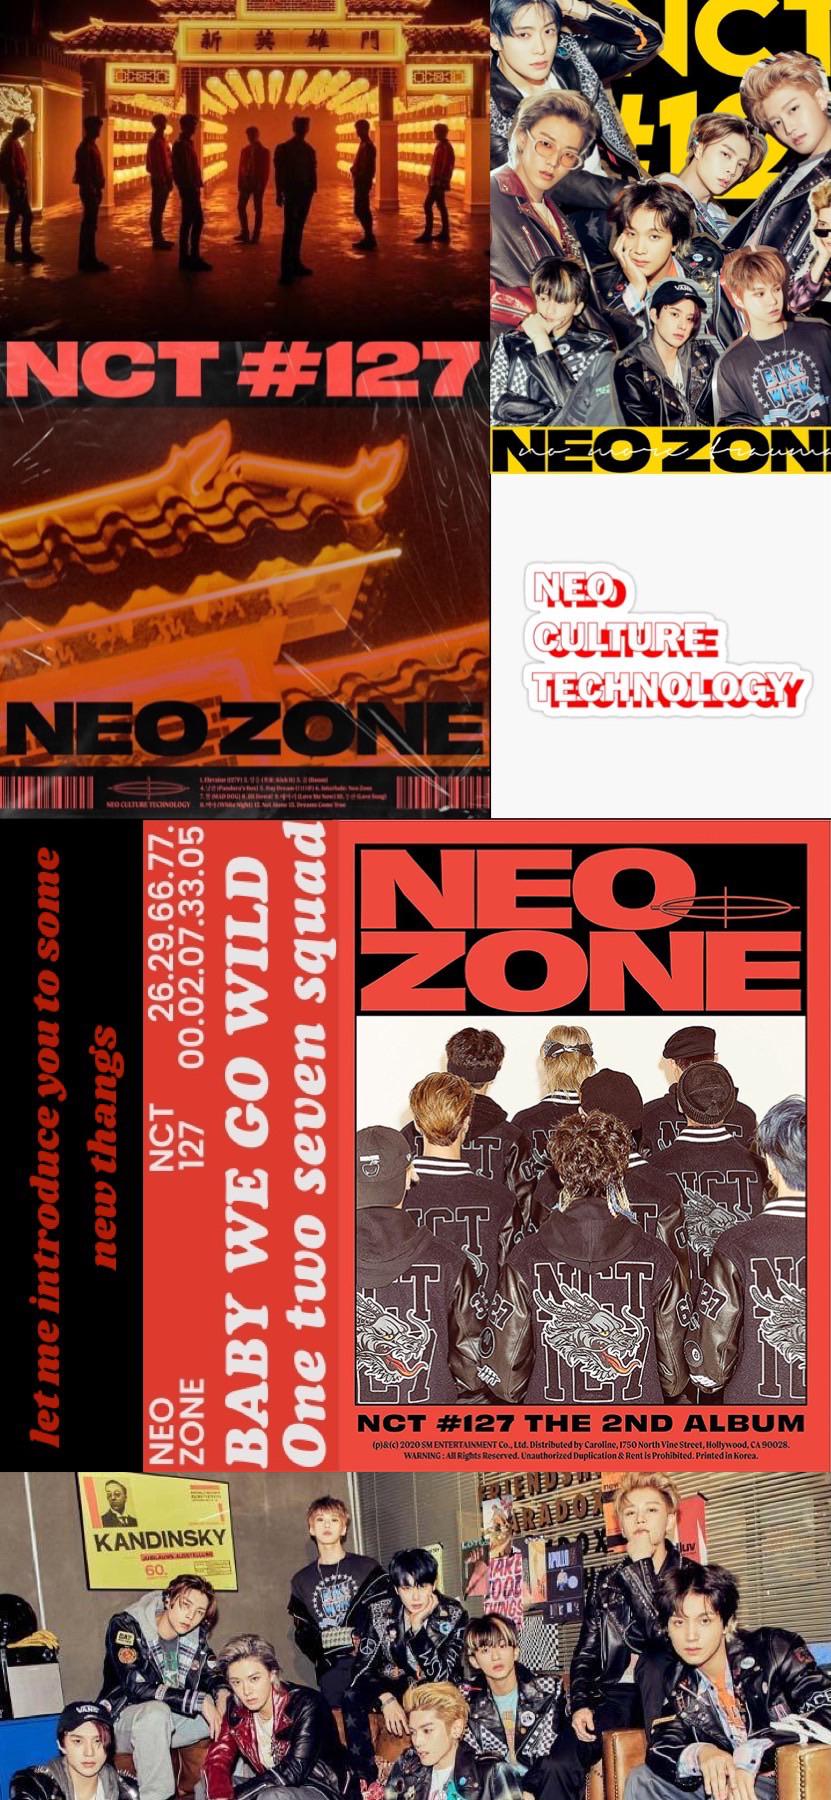 just made a neo zone inspired wallpaper!! what do you think?